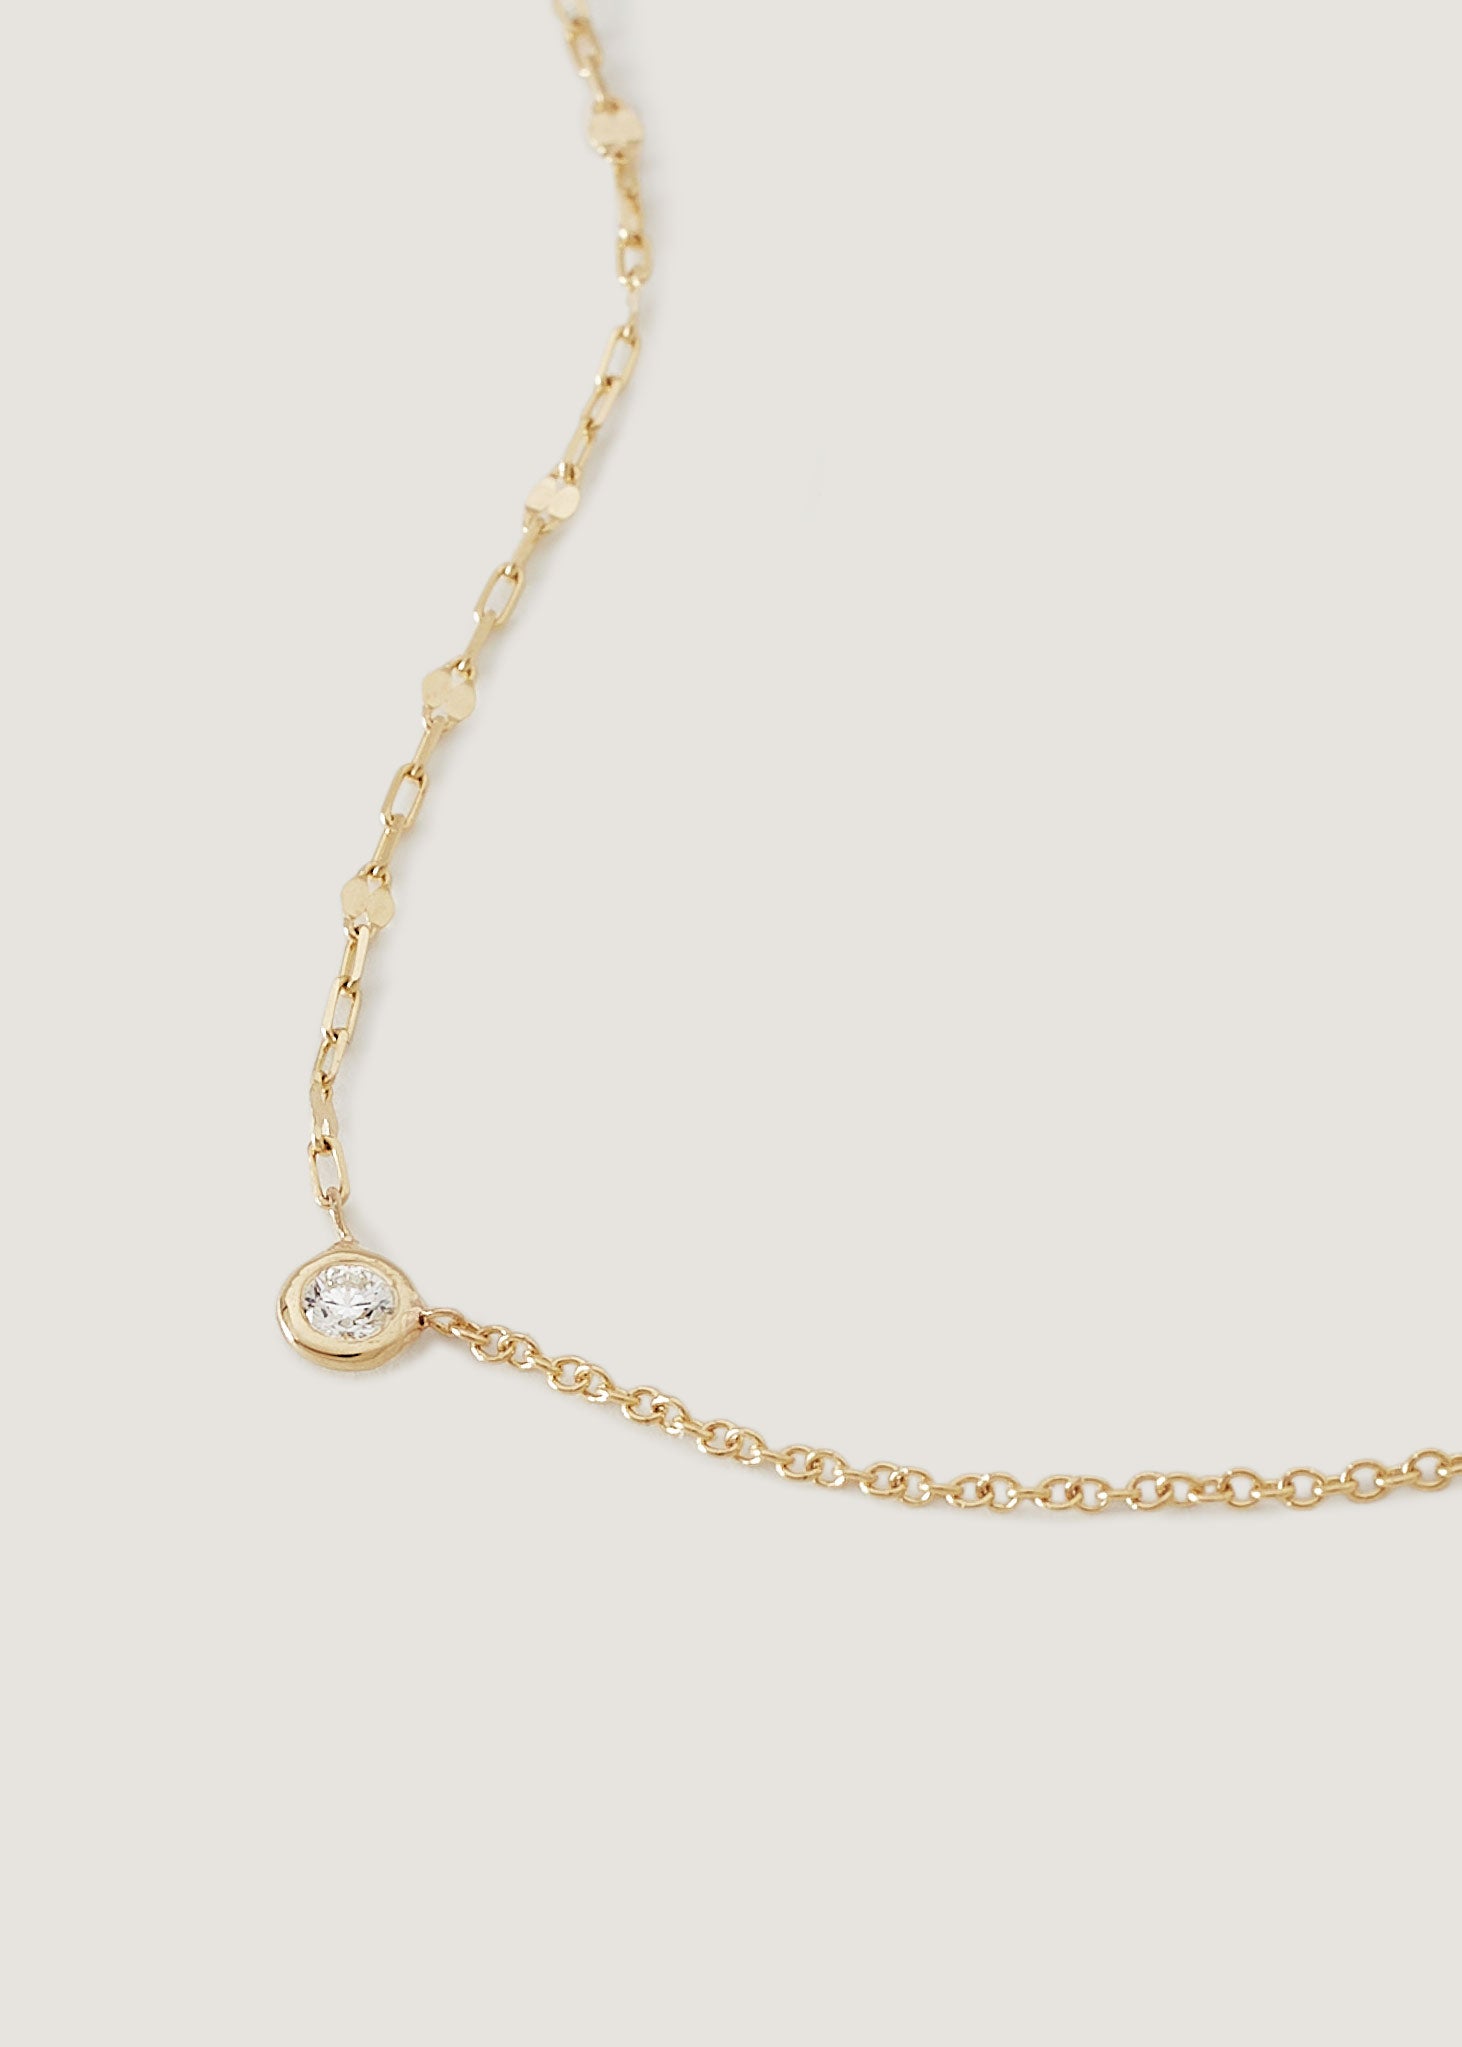 alt="two in one round diamond necklace"